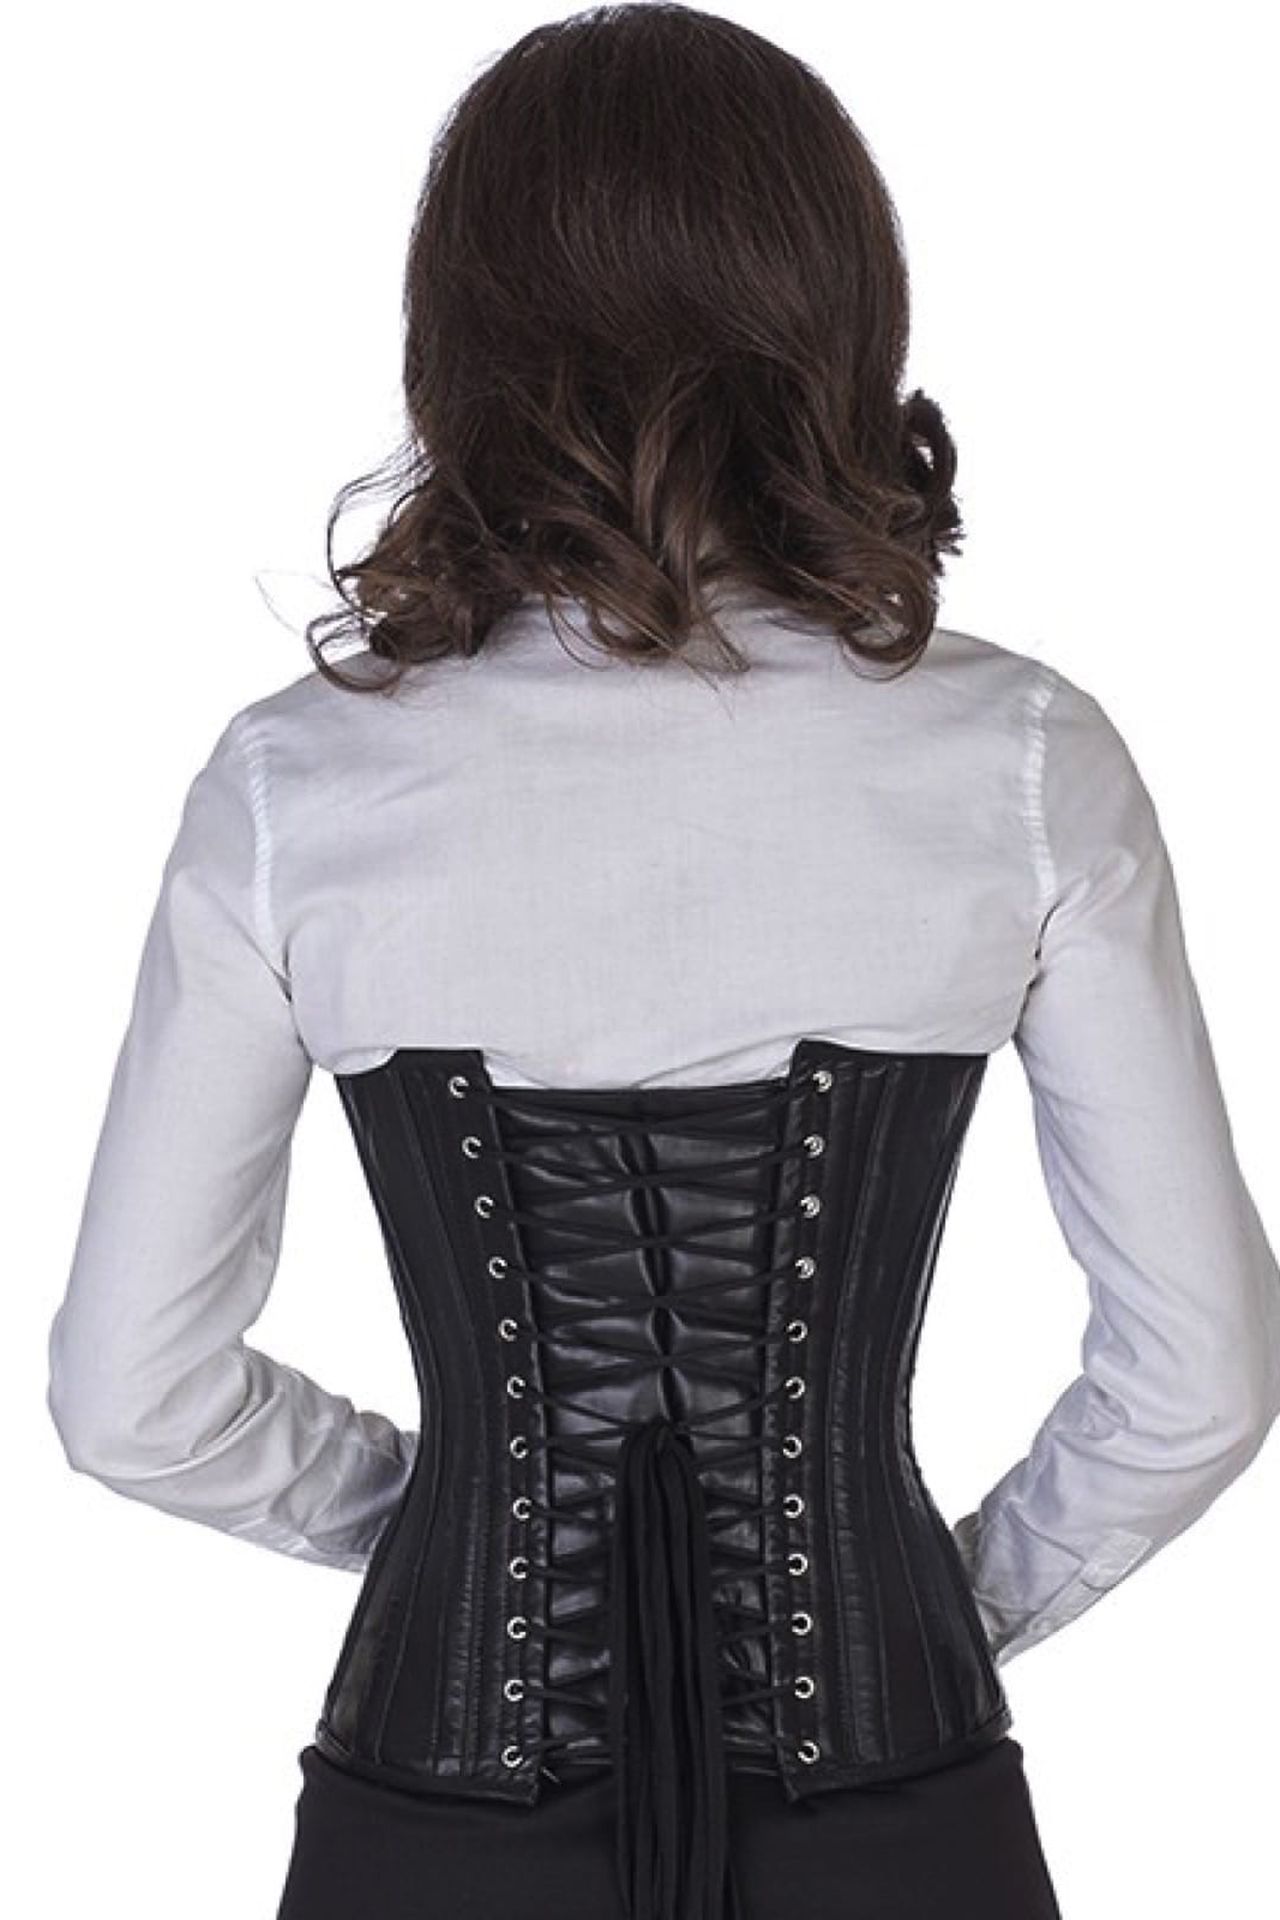 Corset black leather underbust with buckles lc20